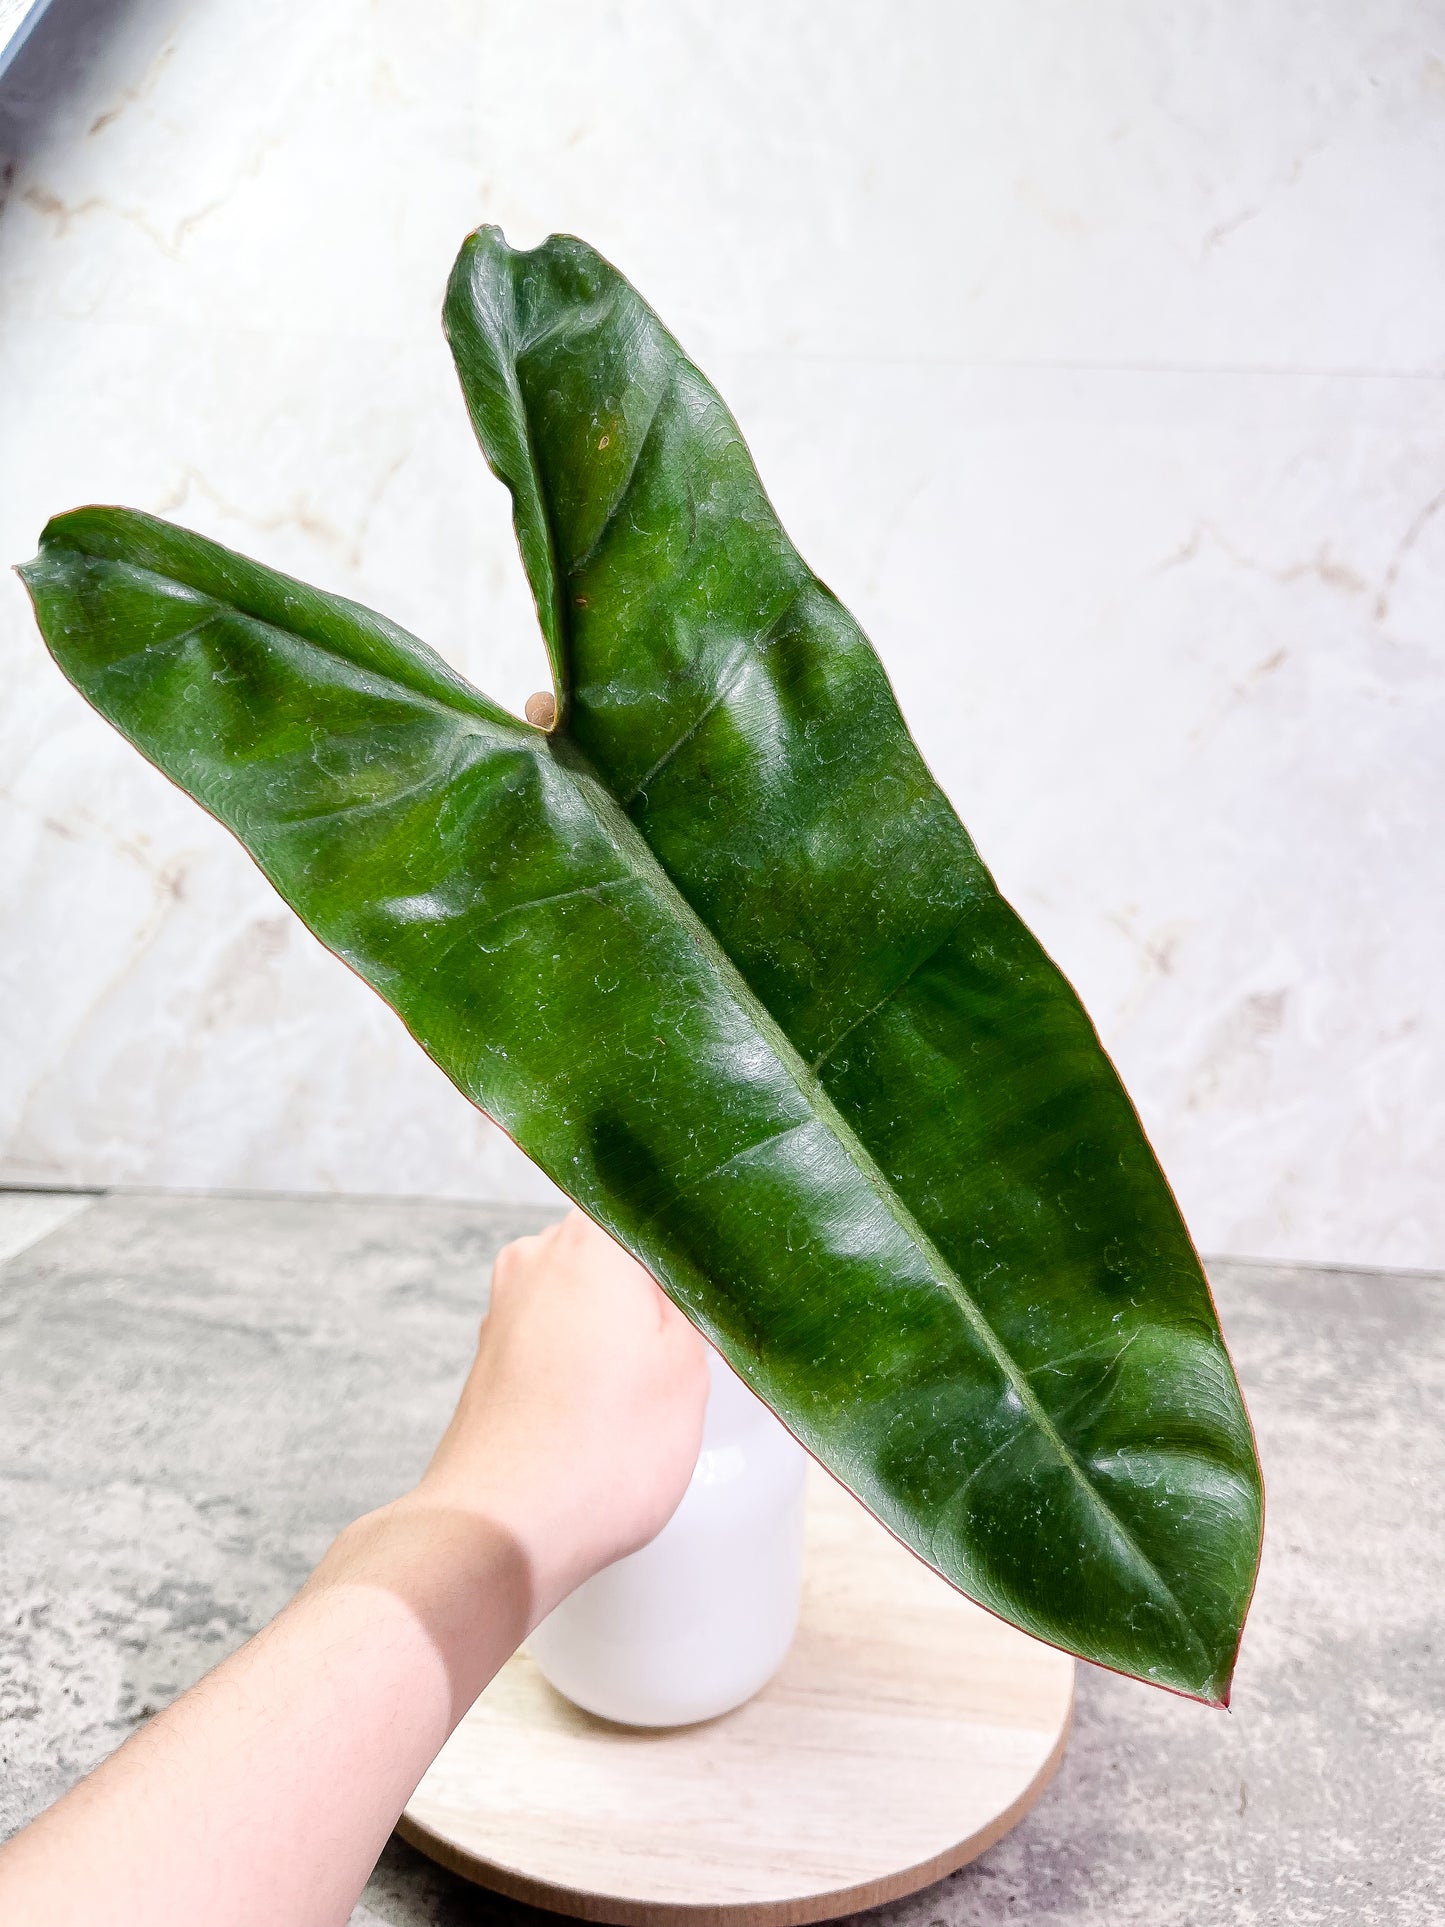 Philodendron Billietiae cutting with 1 leaf double node rooting